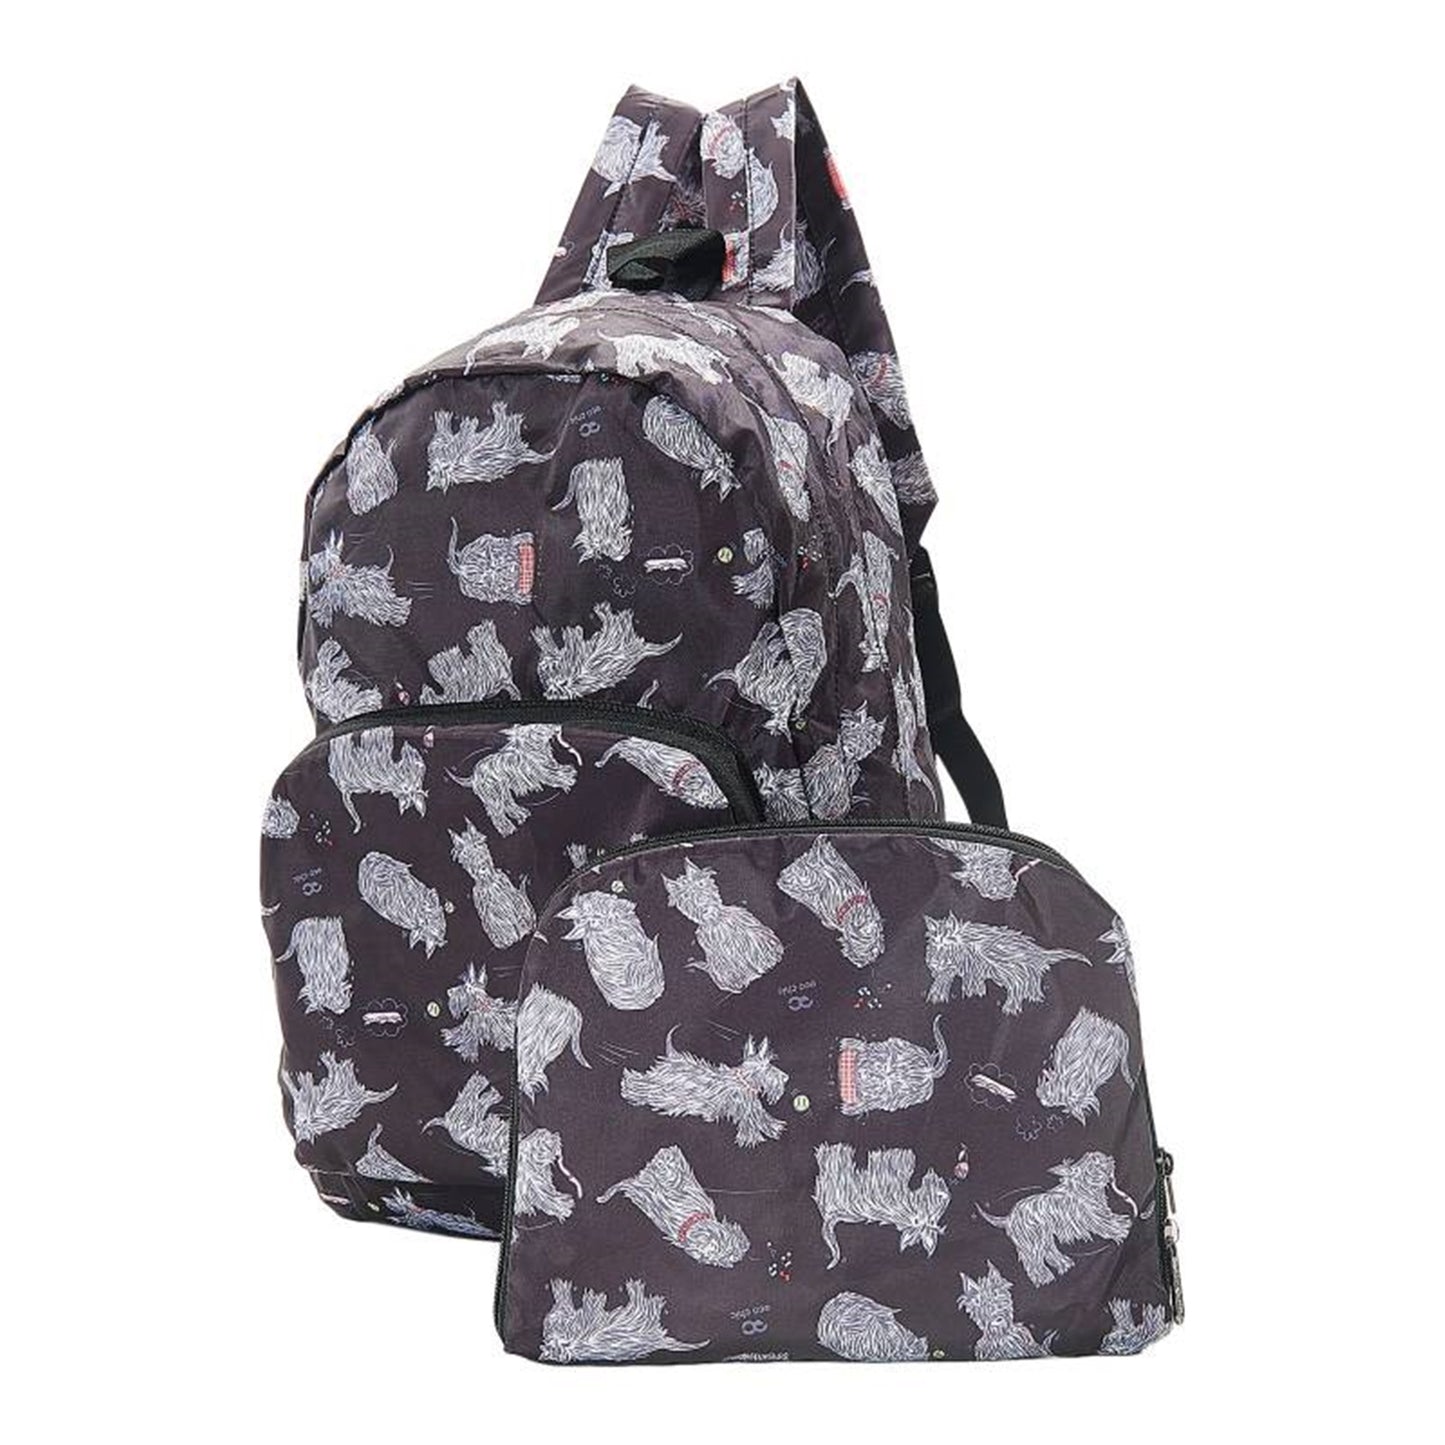 Eco Chic Lightweight Foldable Backpack (Scatty Scotty Black)